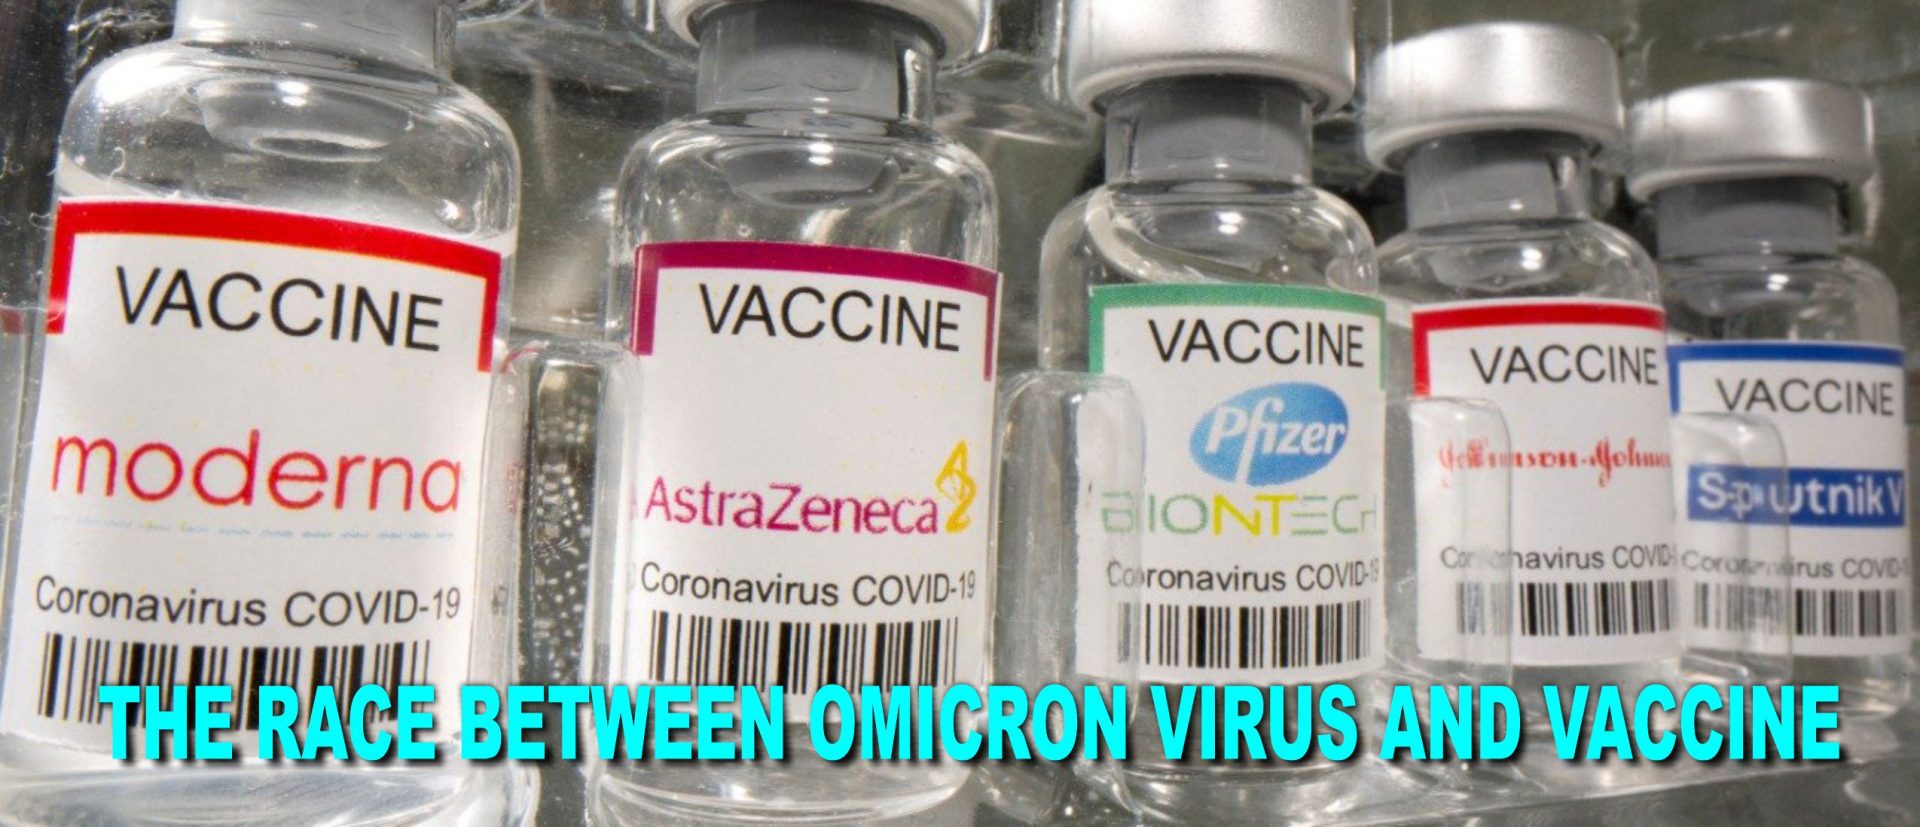 "The race between Omicron Virus and Vaccine"